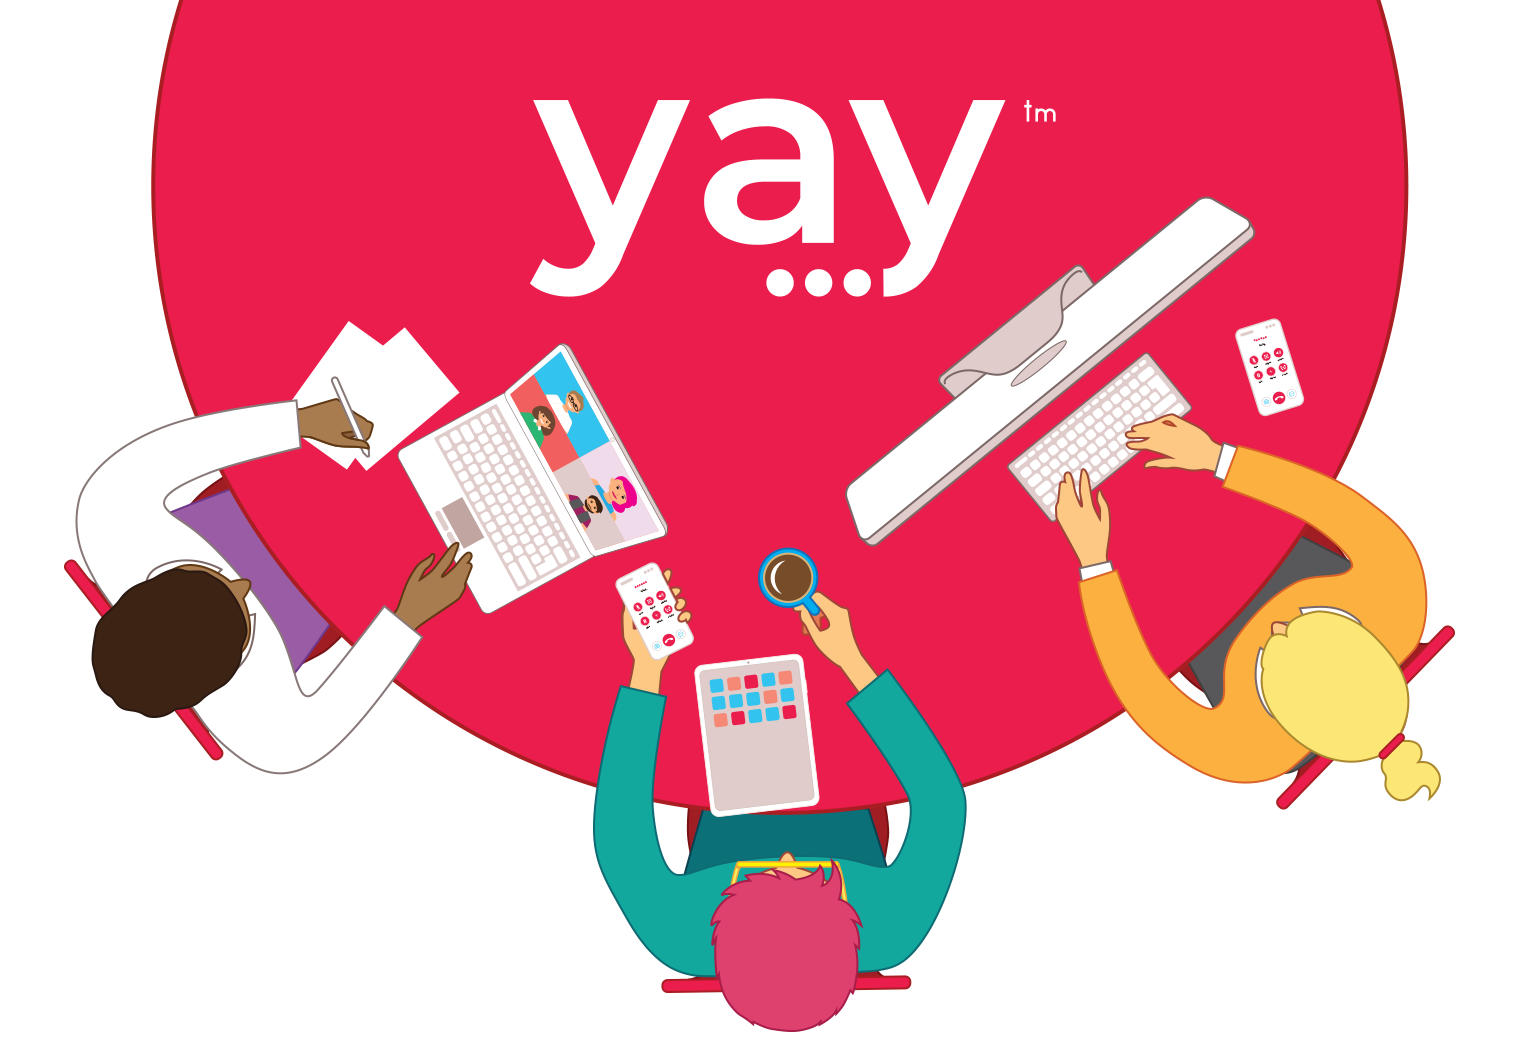 Yay.com Receives Private Equity Investment To Accelerate Channel Offering